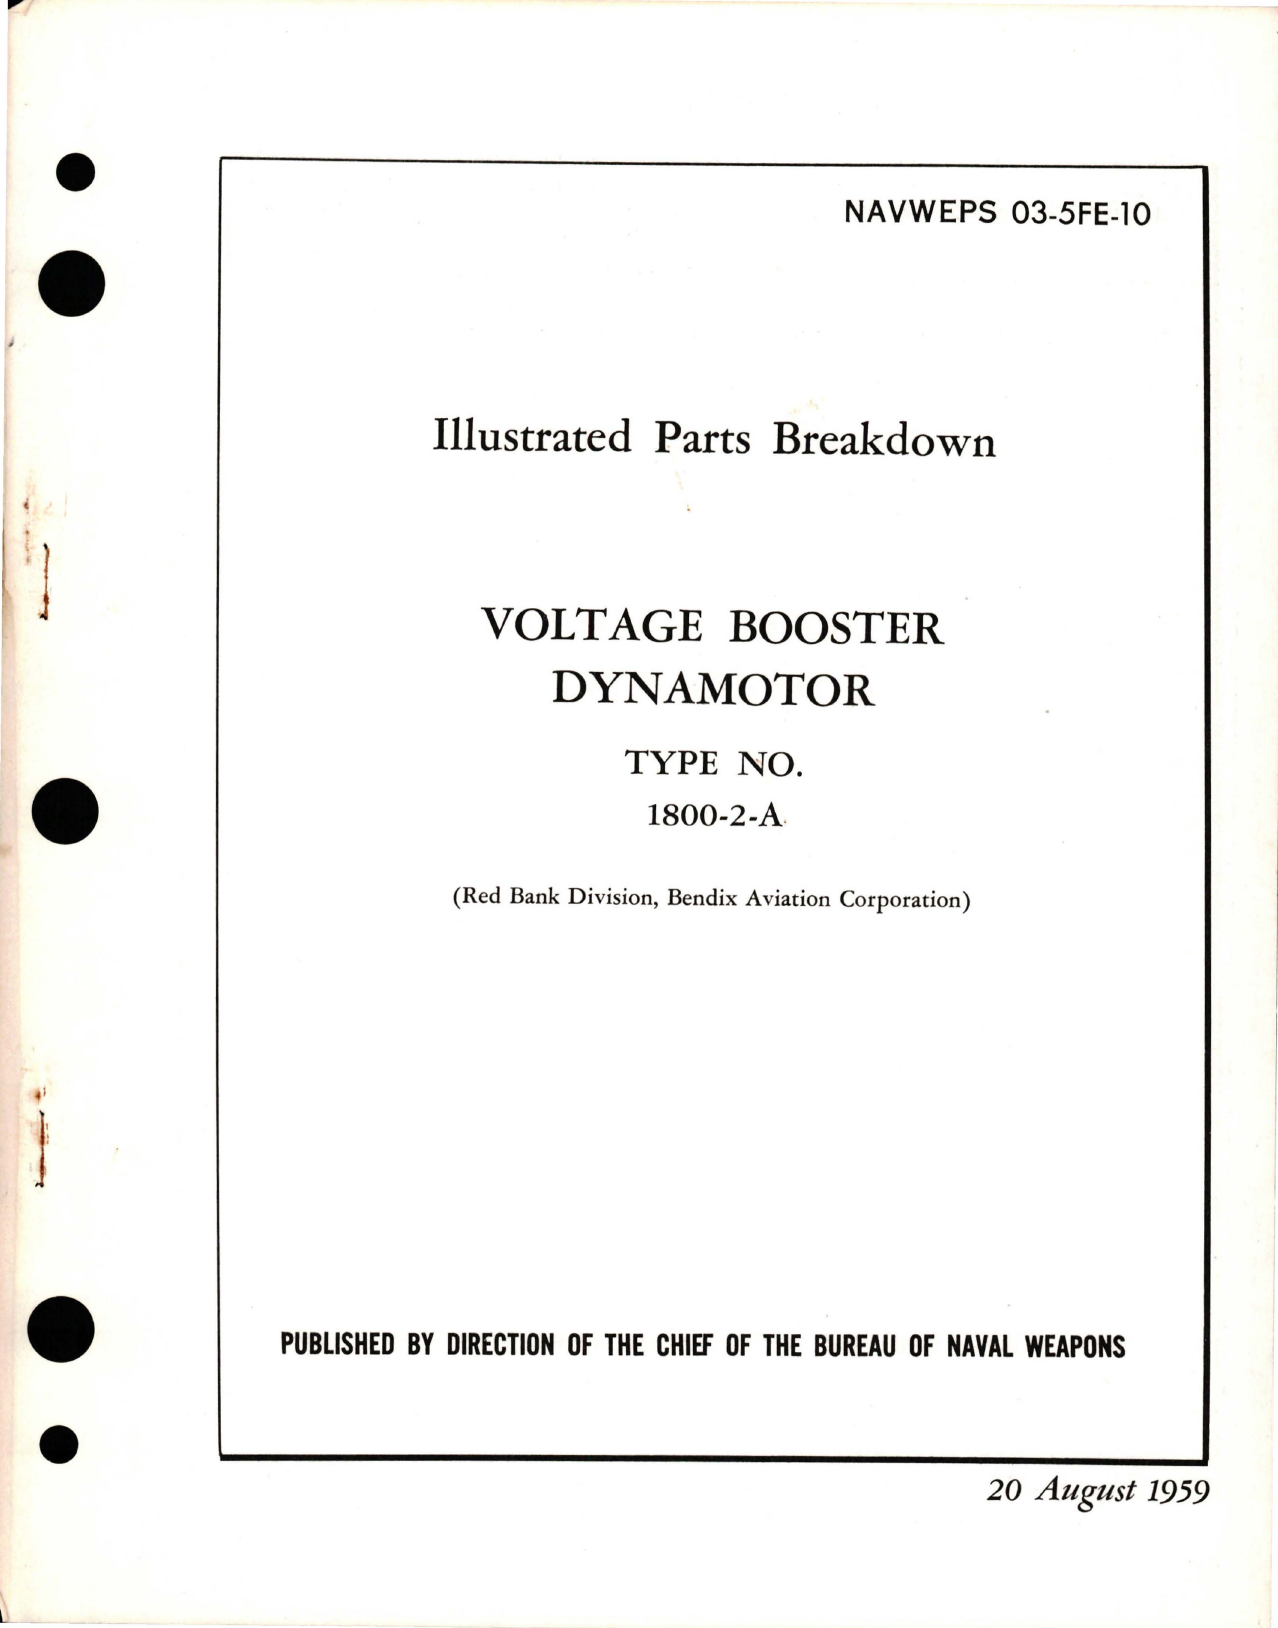 Sample page 1 from AirCorps Library document: Illustrated Parts Breakdown for Voltage Booster Dynamotor - Type 1800-2-A 